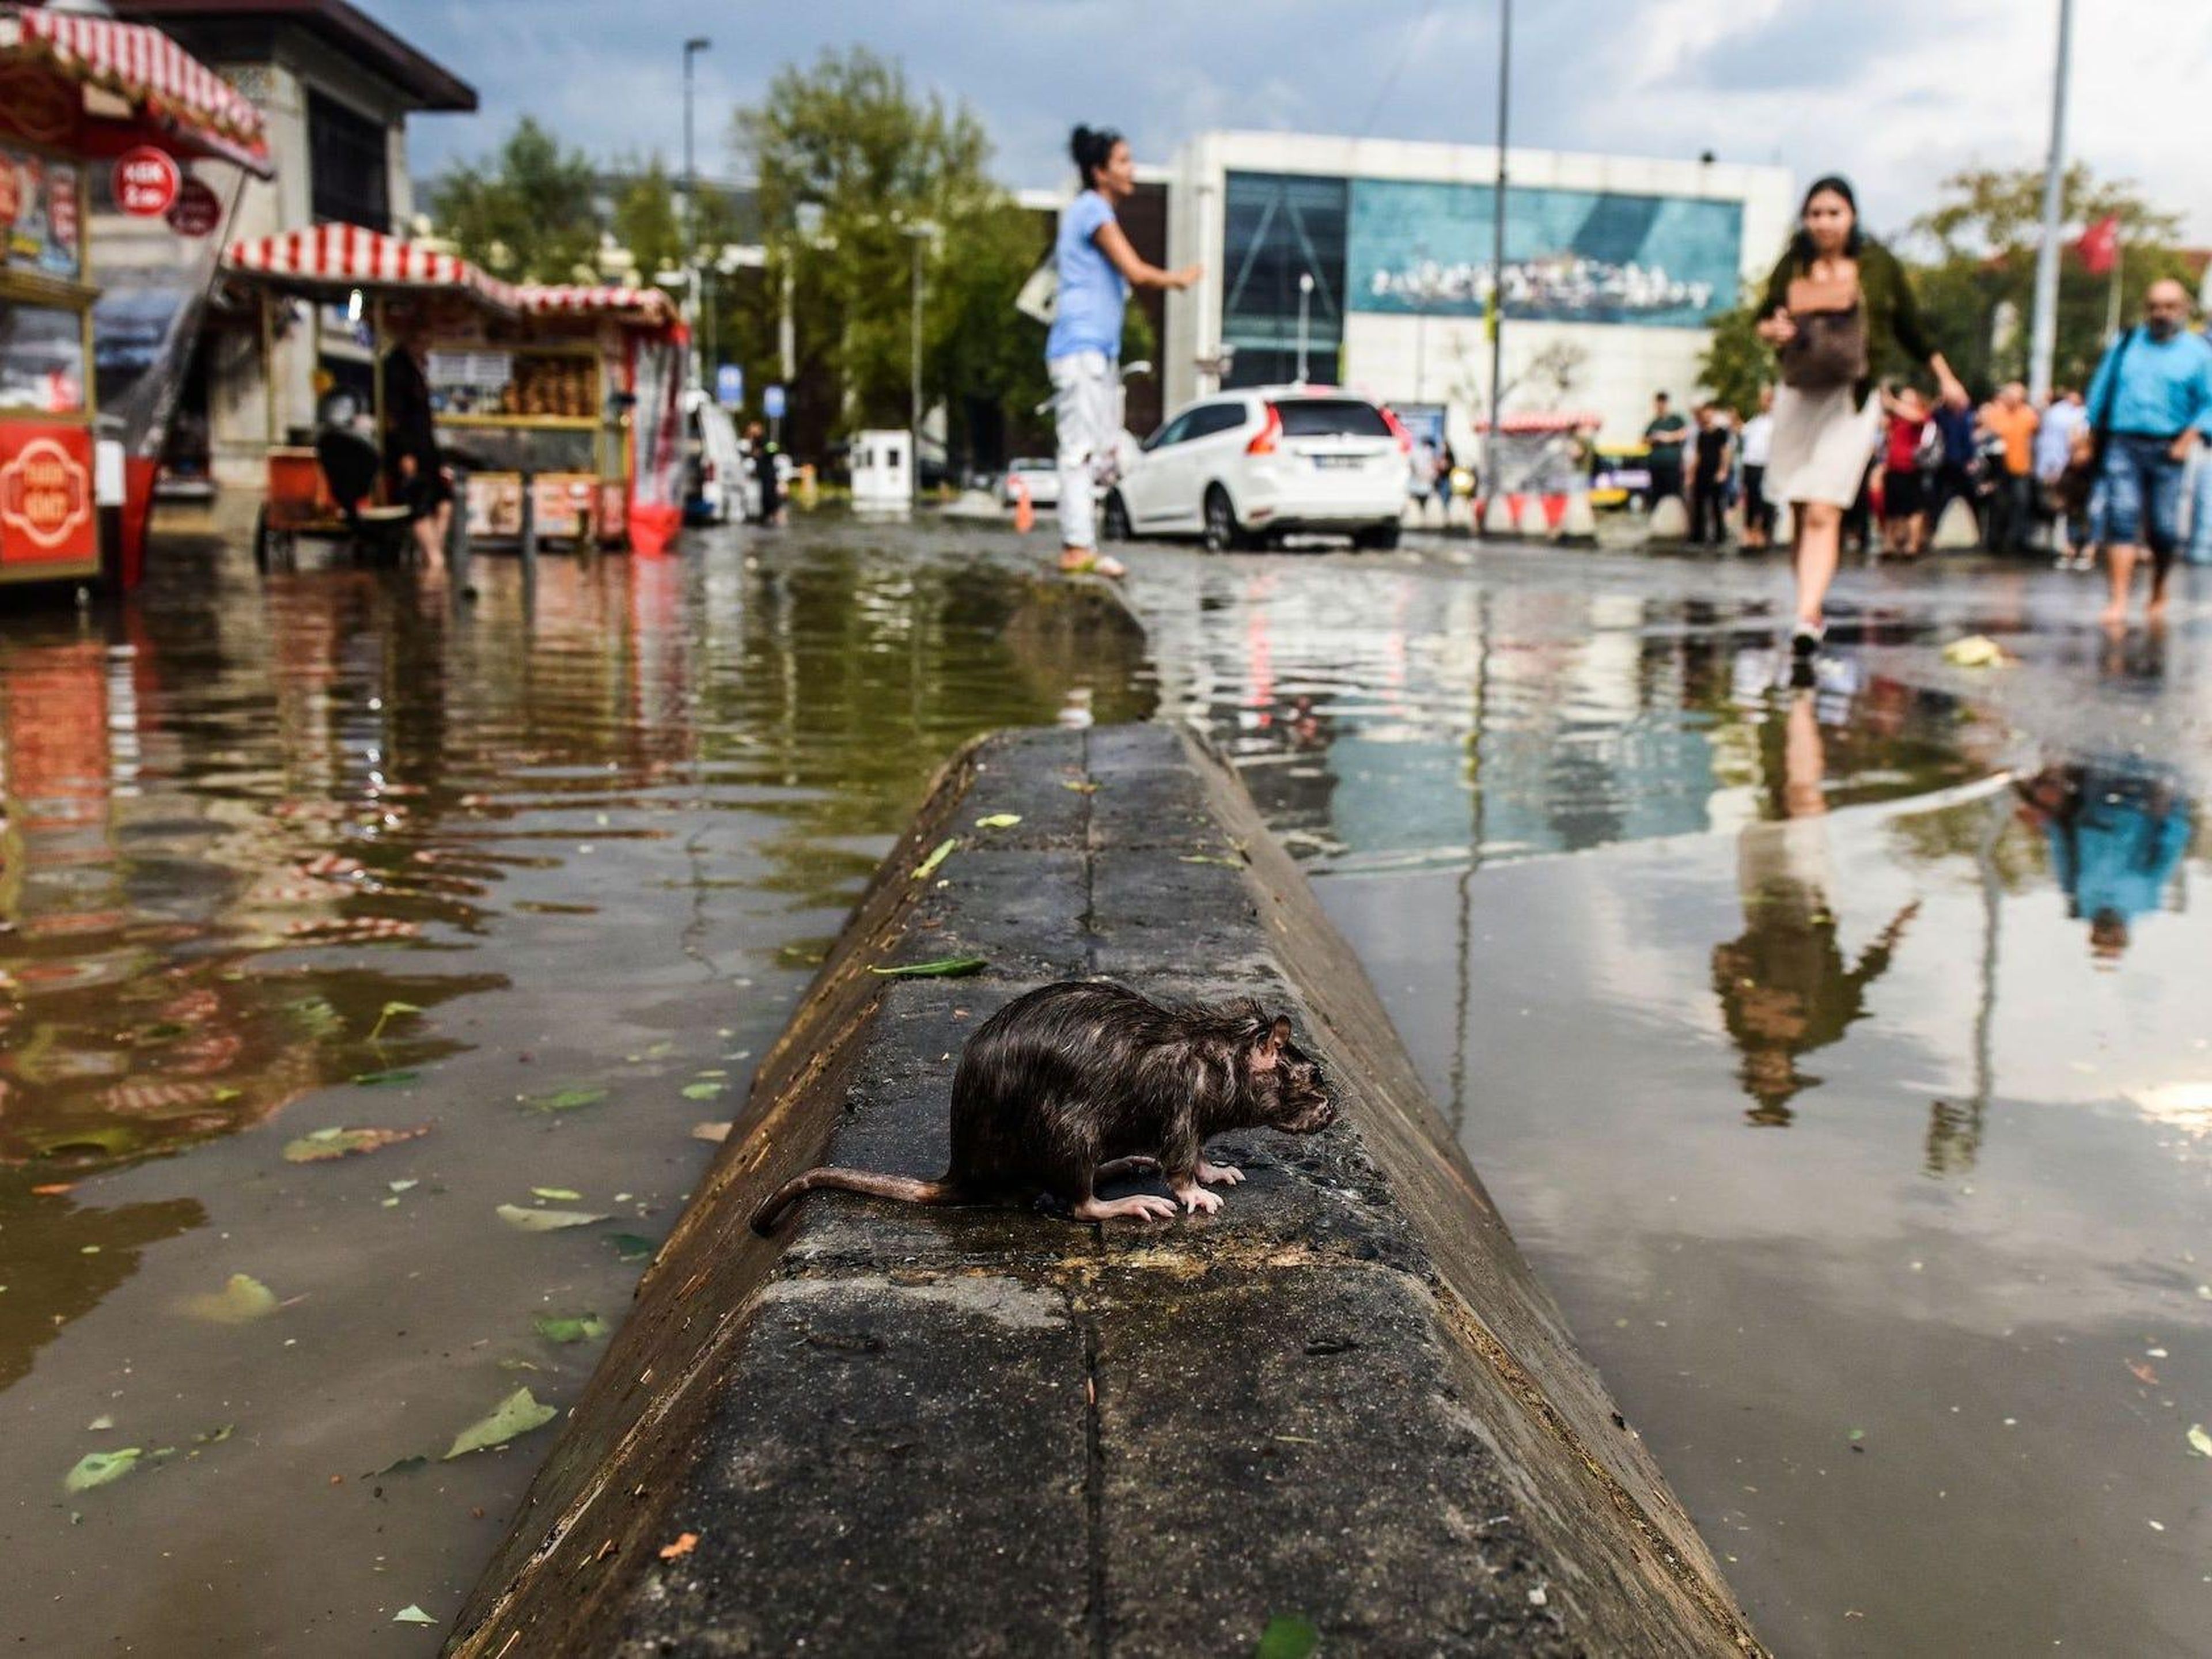 A rat stands on a cement block in a flooded street after a heavy downpour of rain and hail at Besiktas near Istanbul on July 27, 2017.